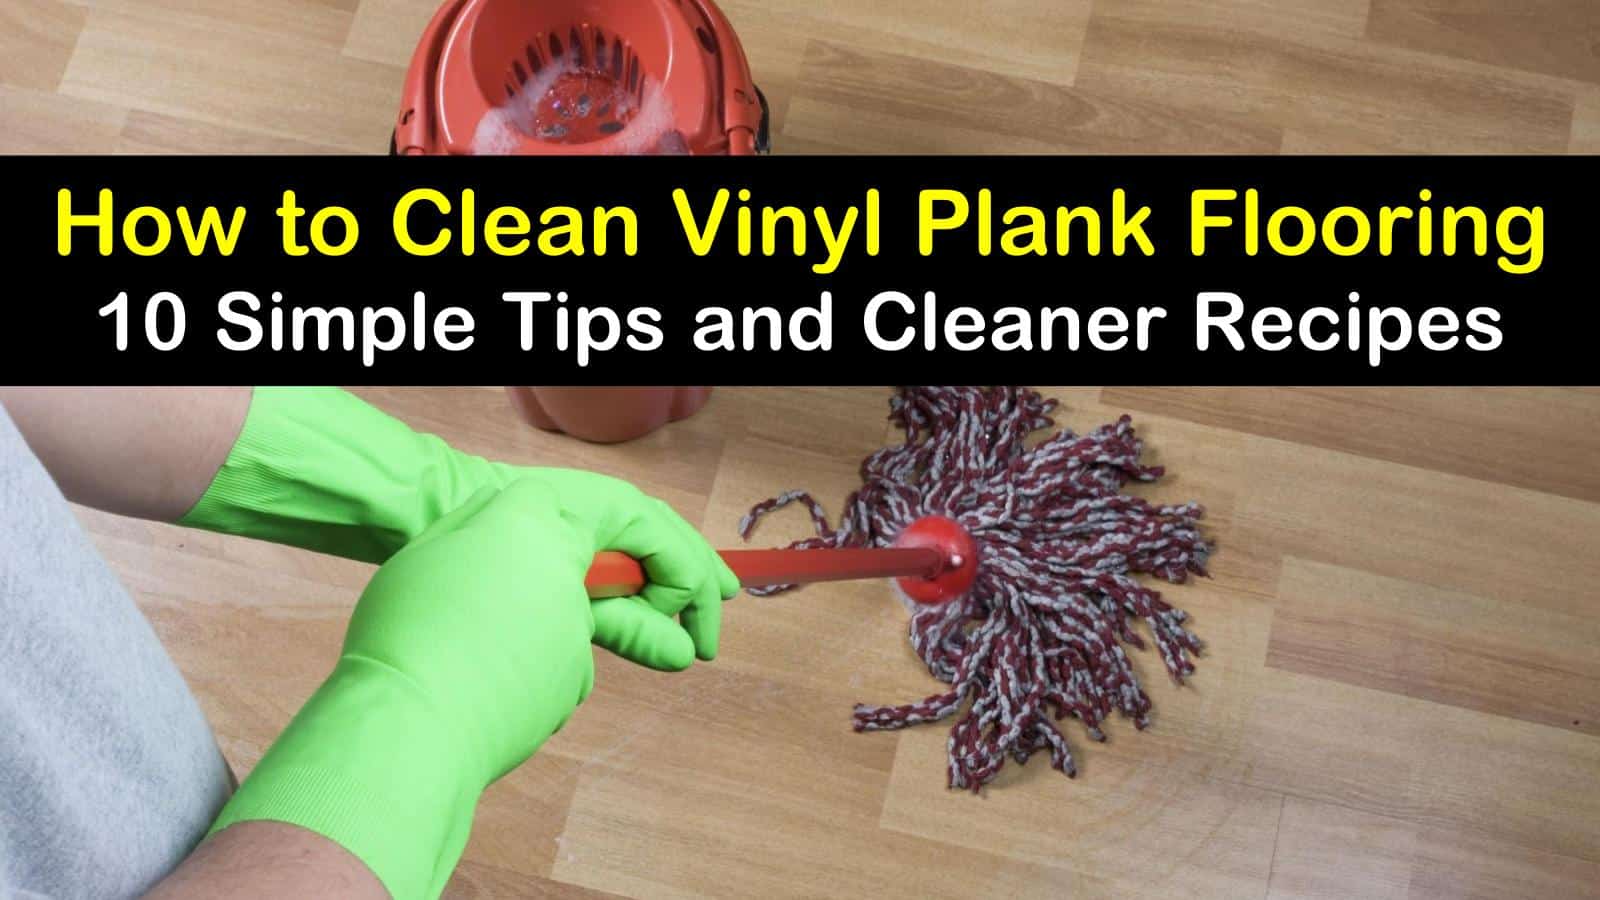 How to Clean Vinyl Floors - The Home Depot